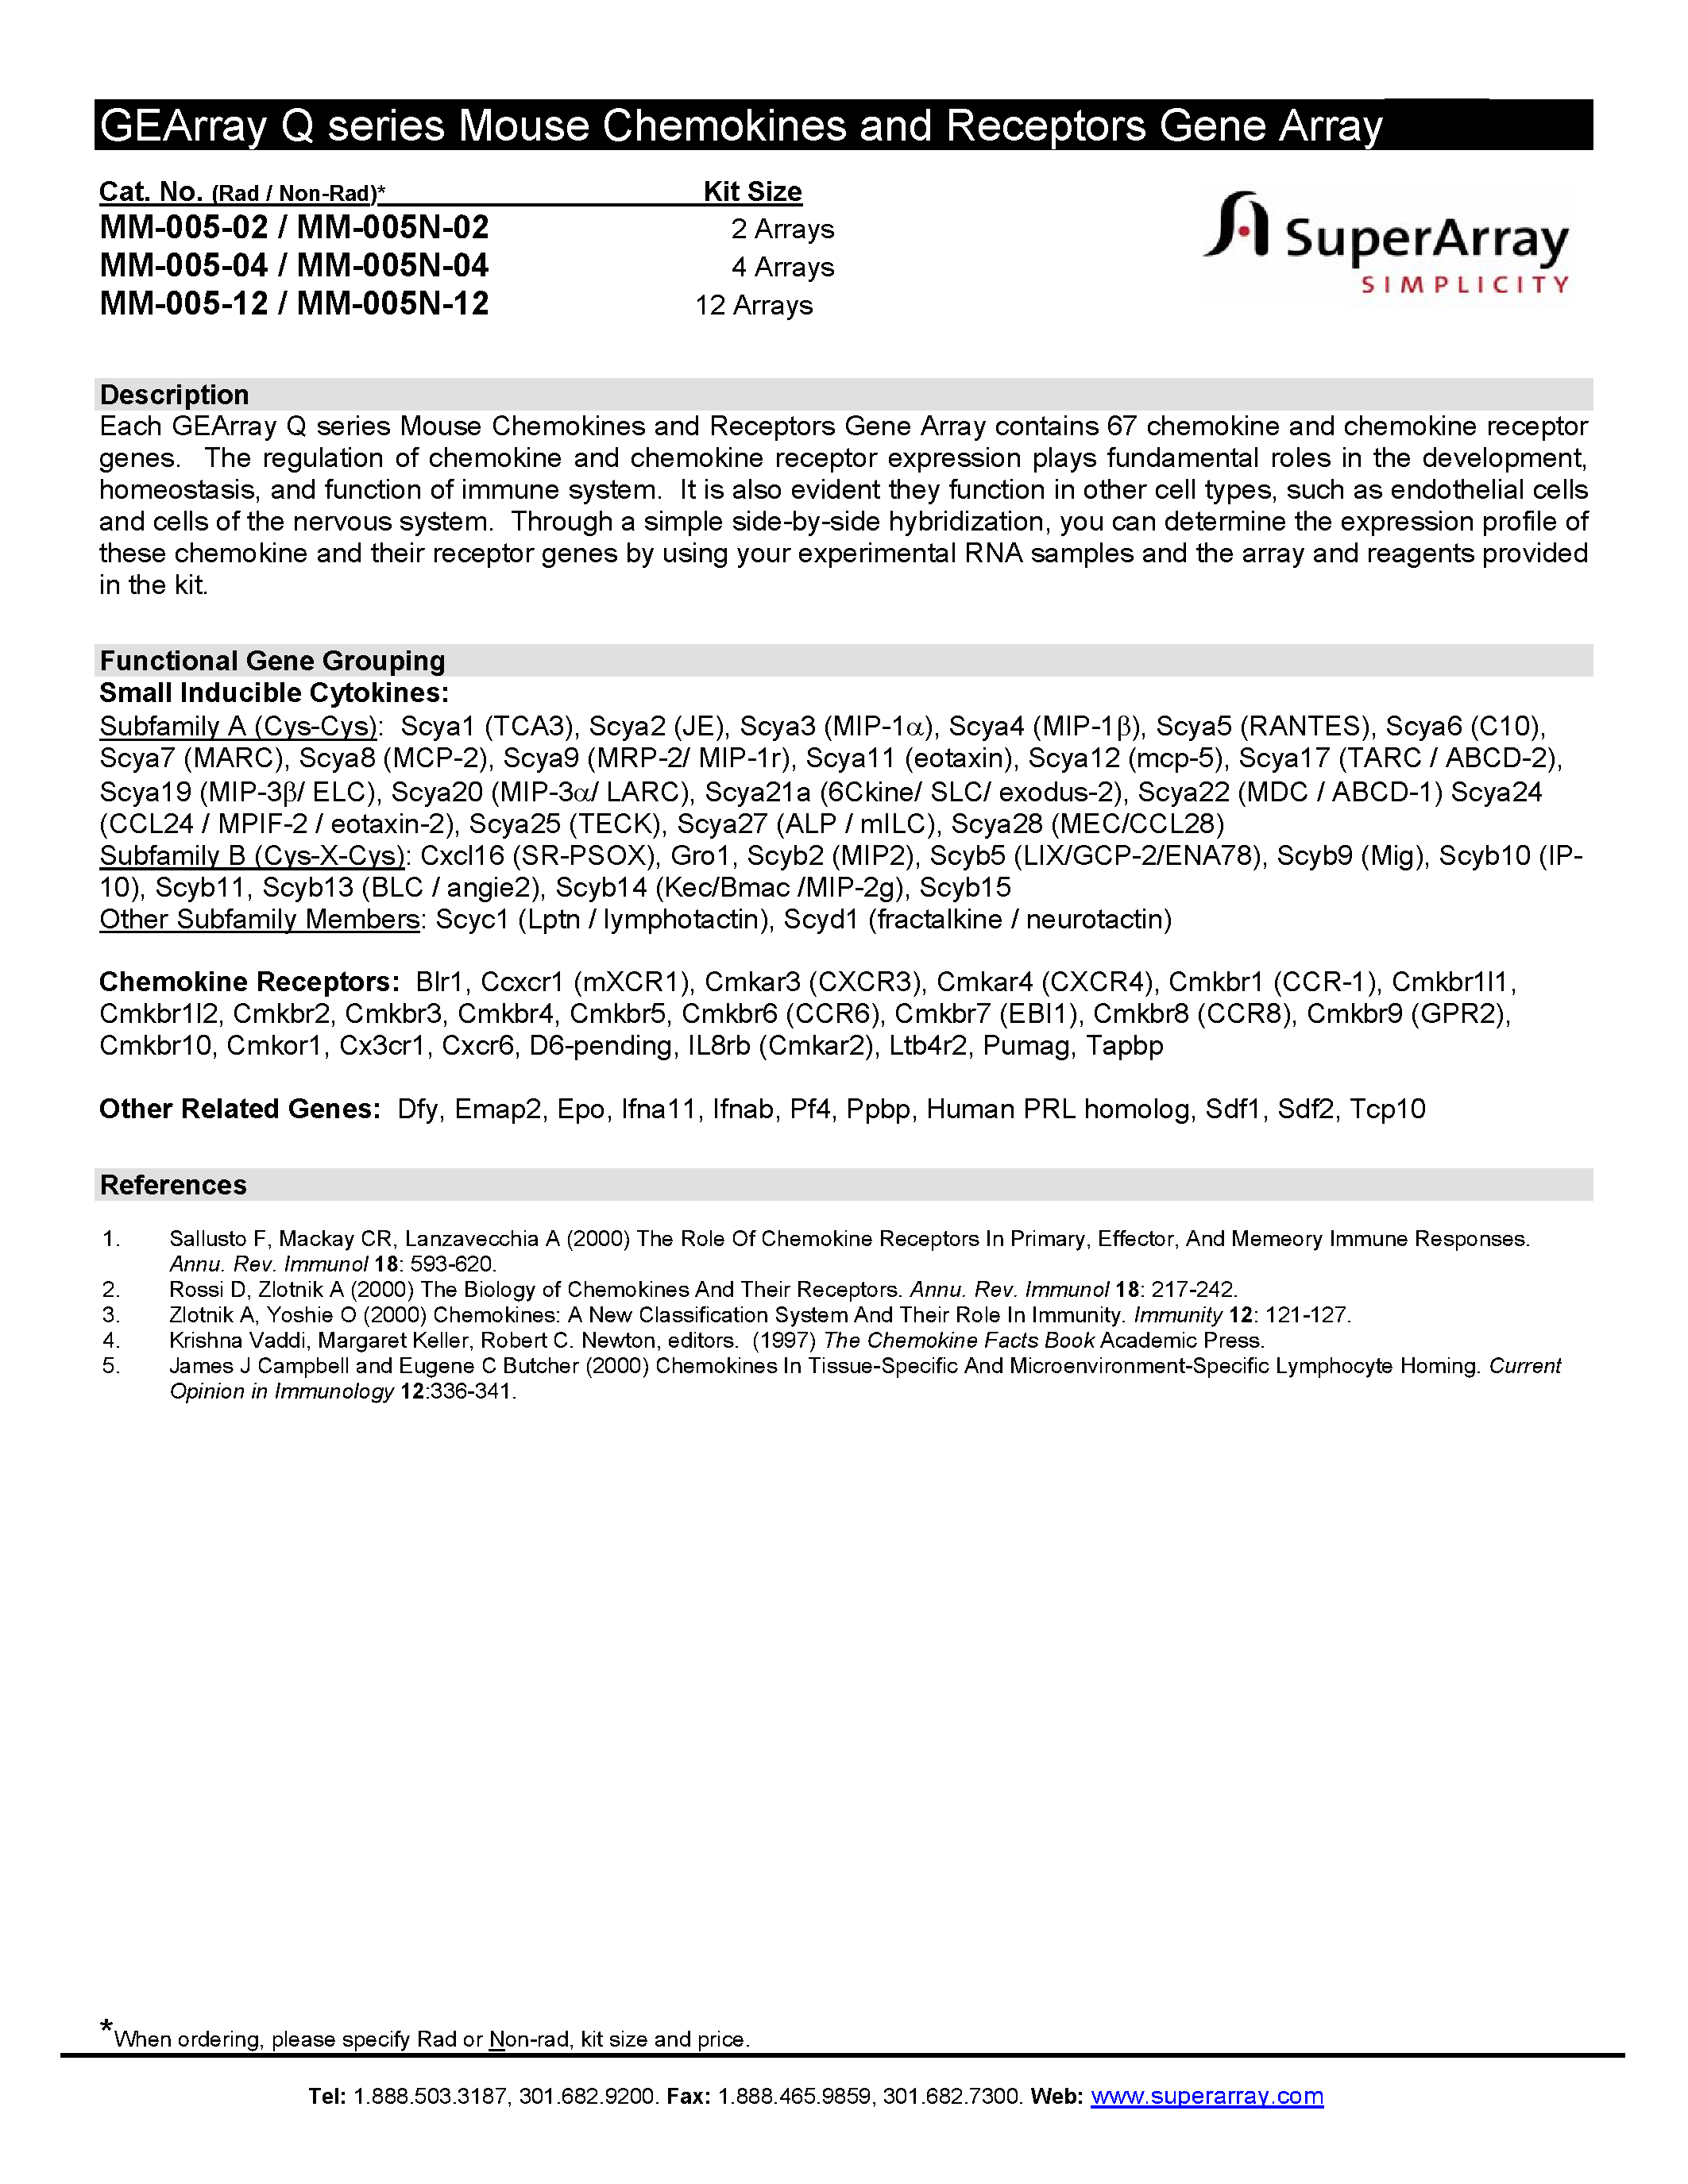 Datasheet MM-005N-12 - GEArray Q series Mouse Chemokines and Receptors Gene Array page 1